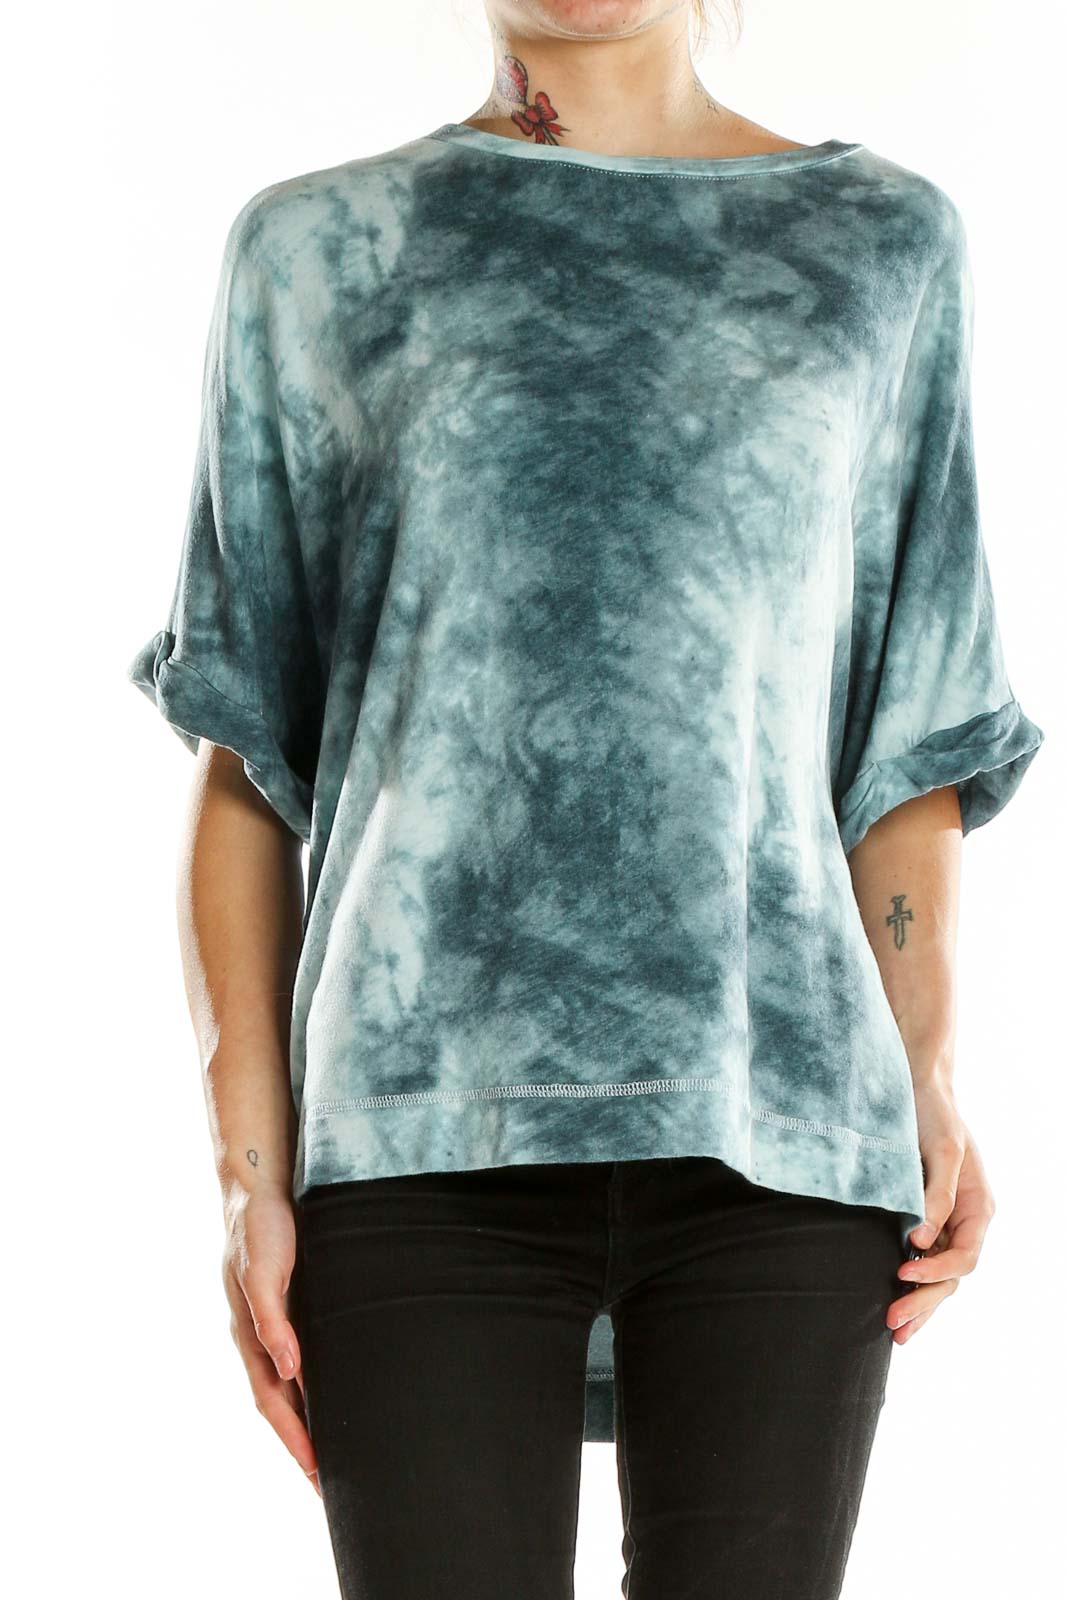 Blue Green Tie and Dye Top Front